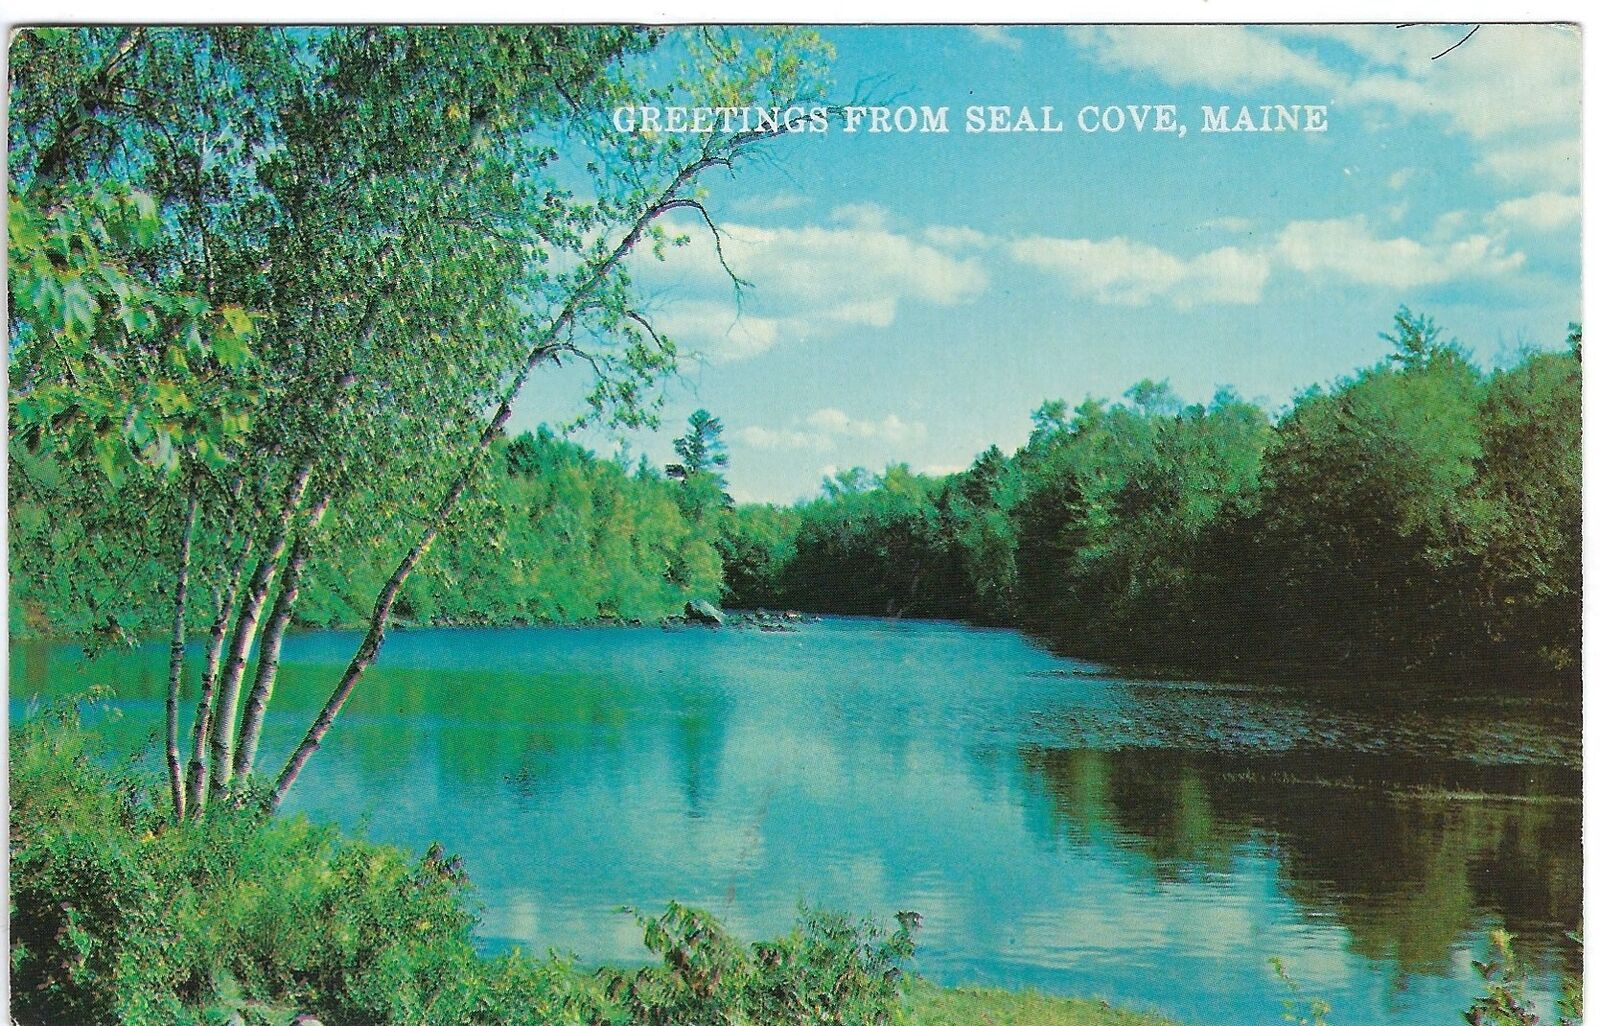 Greetings from Seal Cove, Maine Postcard, Unposted, RPPC